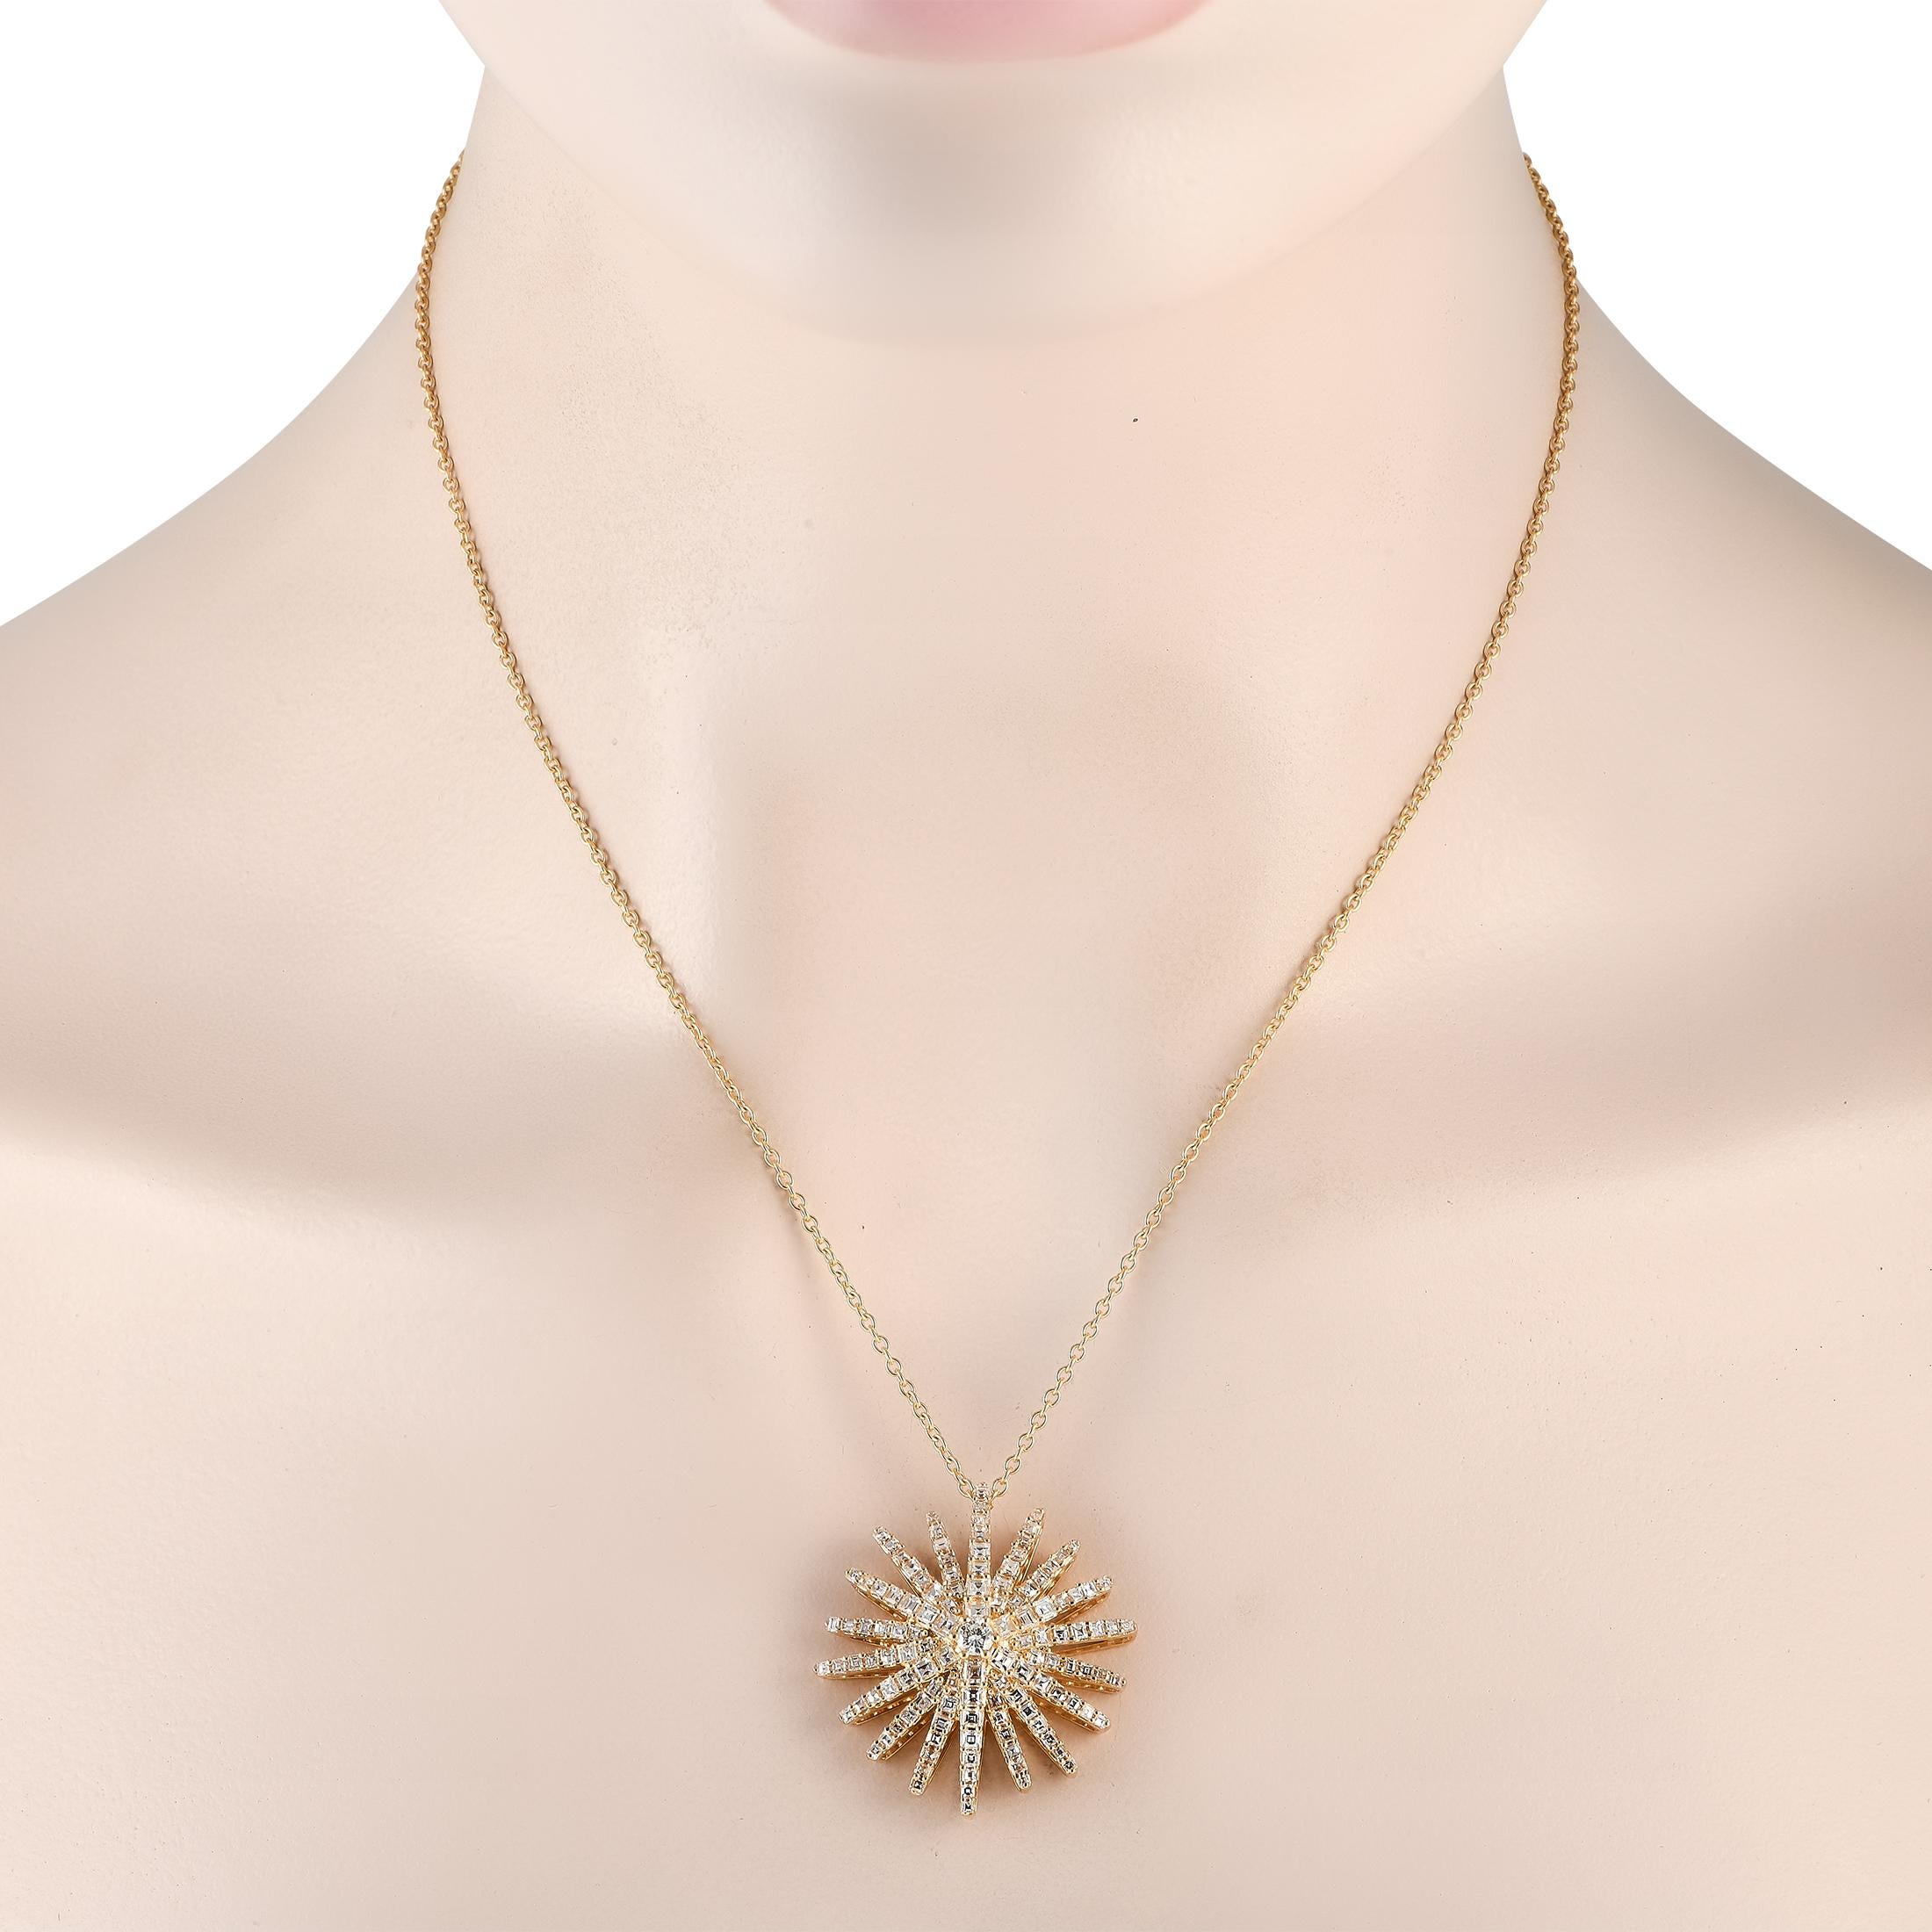 Shine brilliantly in style with this yellow gold diamond necklace. Its pendant measures 1.25 in diameter and has a shimmering sunburst design. Right in its center is a lone 0.14ct round diamond. Radiating outwards are rays lined with tapering